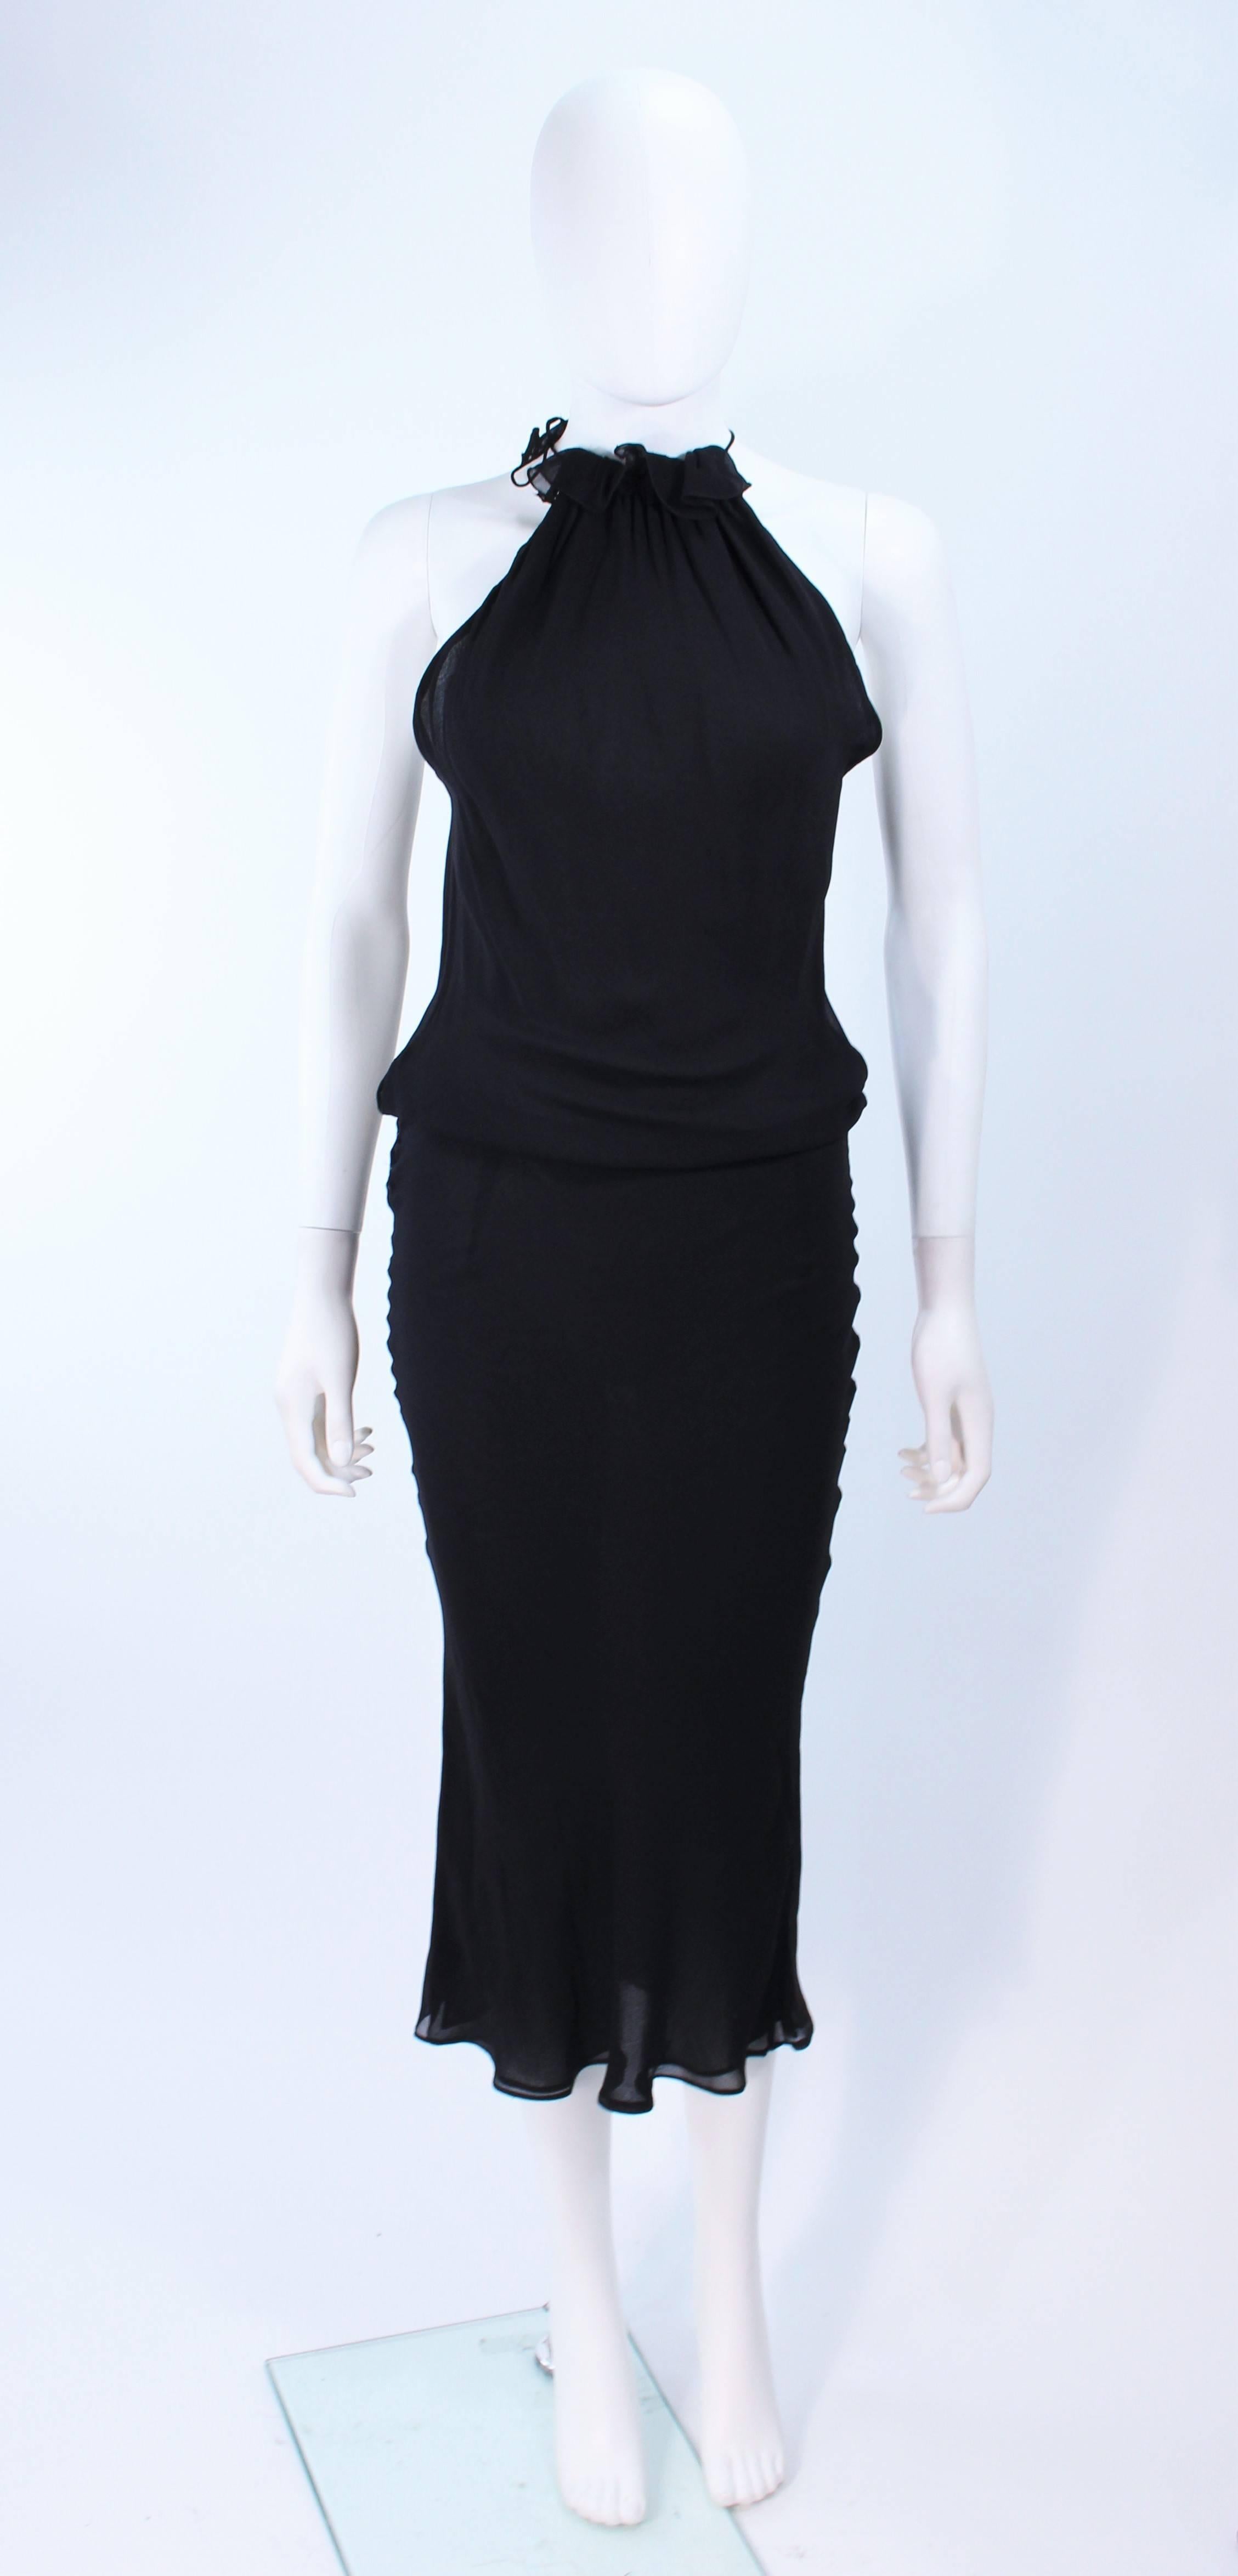 This Ungaro dress is composed of a bias cut black silk. Features ruffle halter neck and side snap closures. In excellent vintage condition.

**Please cross-reference measurements for personal accuracy. Size in description box is an